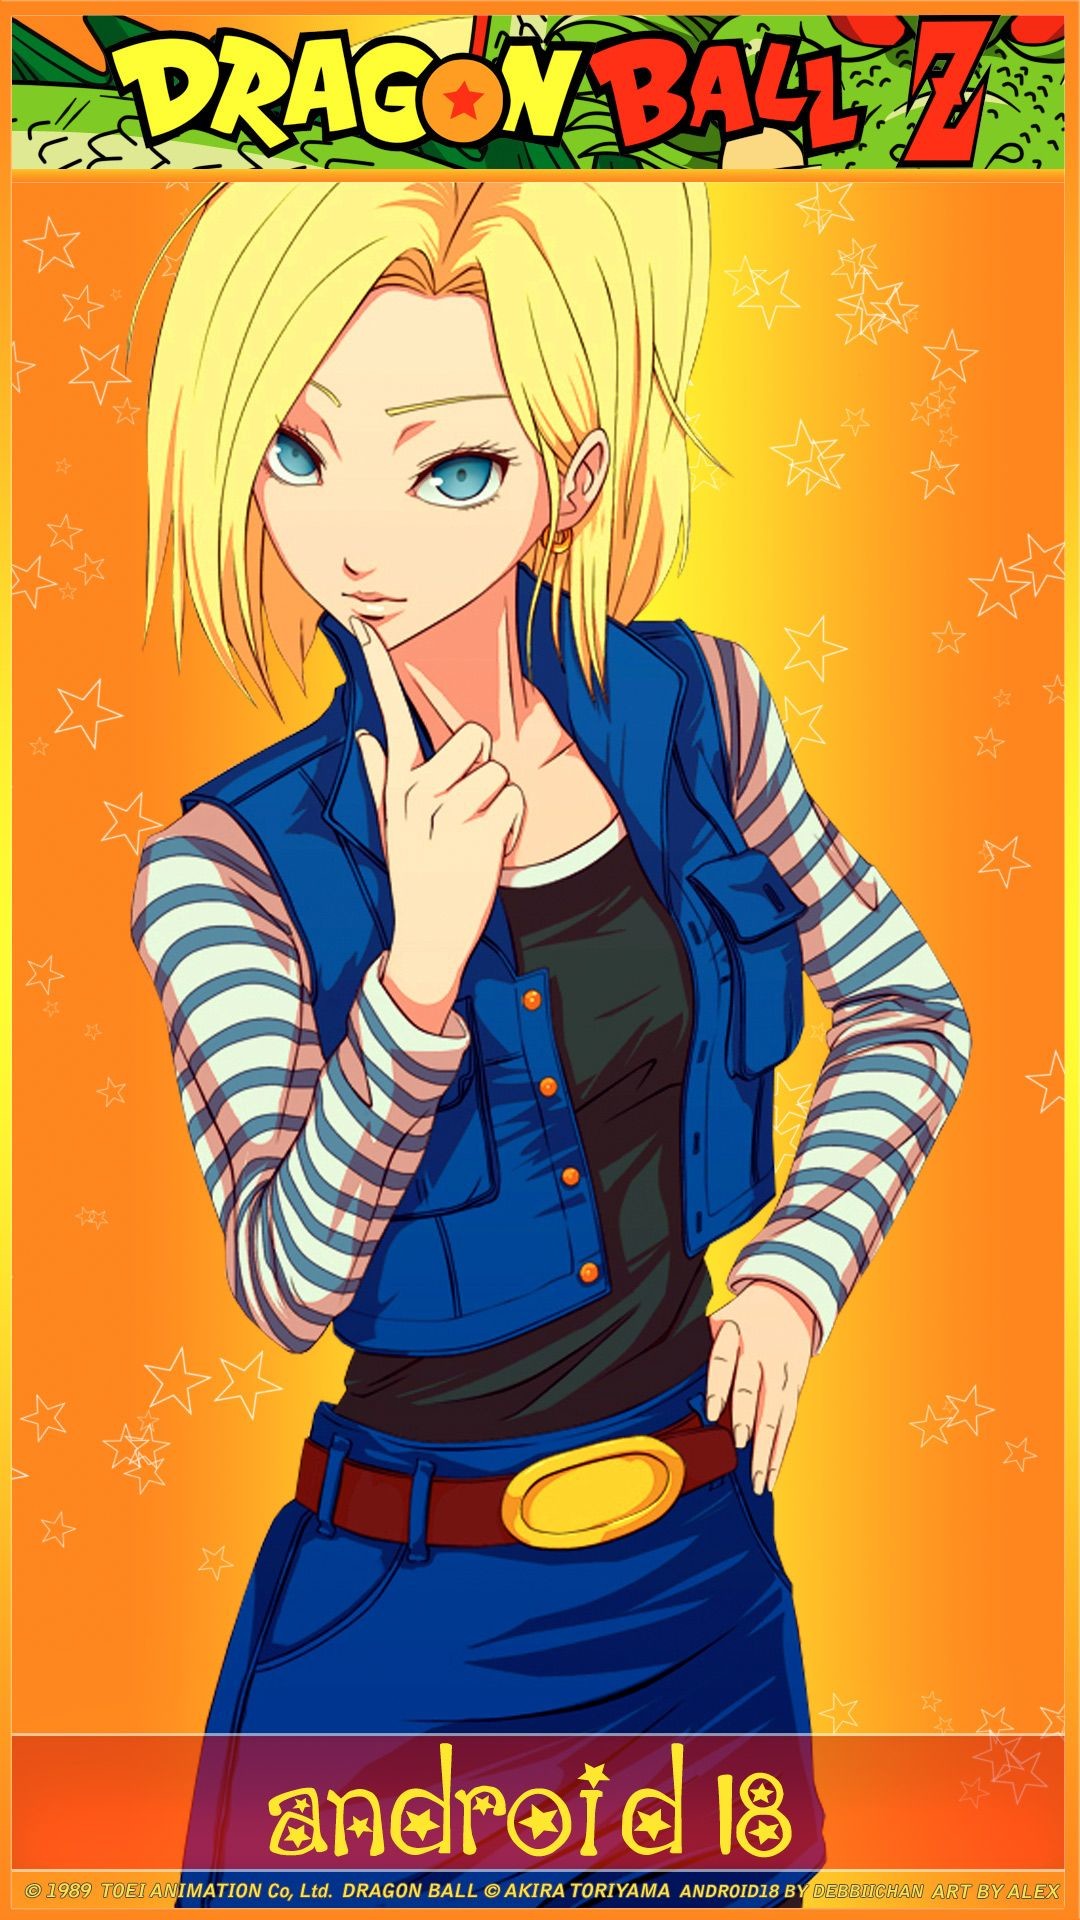 android 18 wallpaper,cartoon,anime,illustration,cool,fictional character